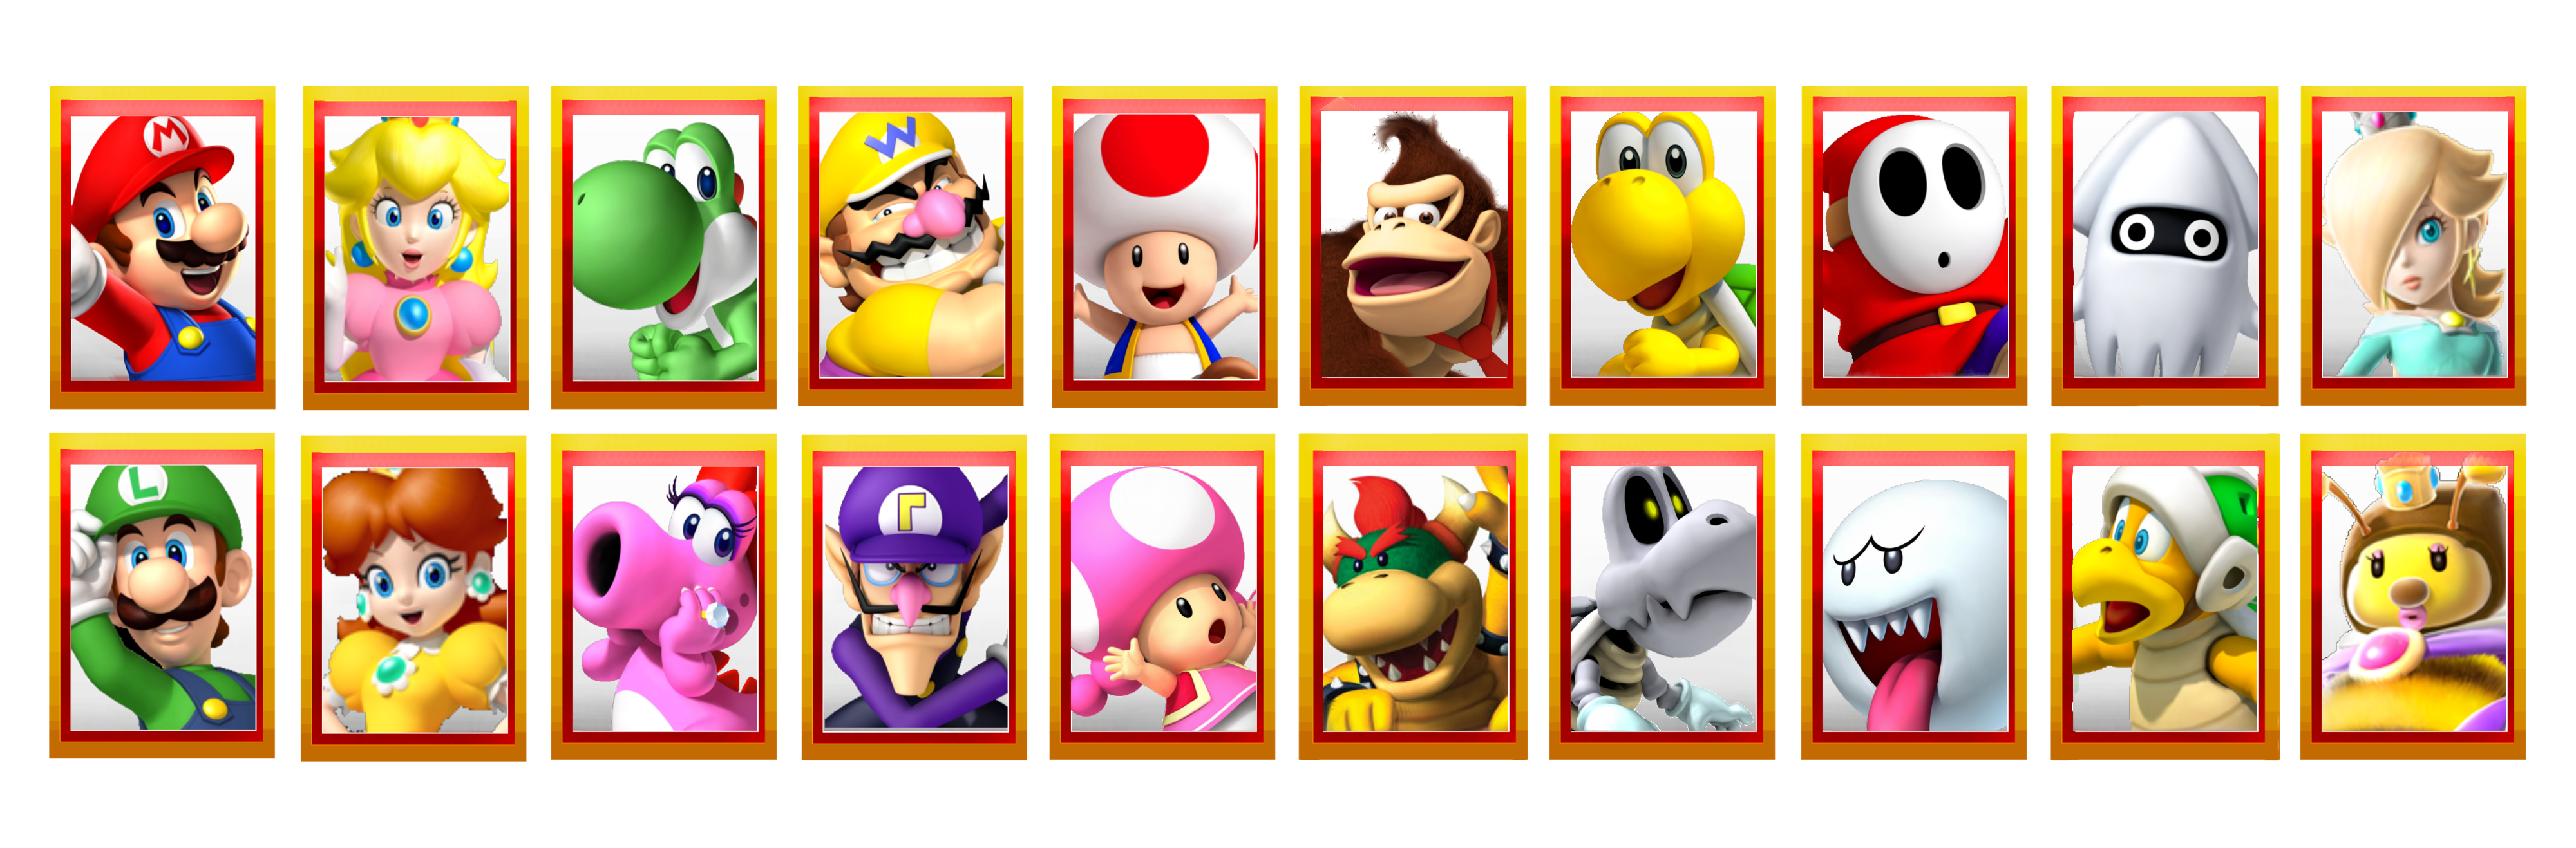 How to unlock characters, new modes, boards, and more in Super Mario Party